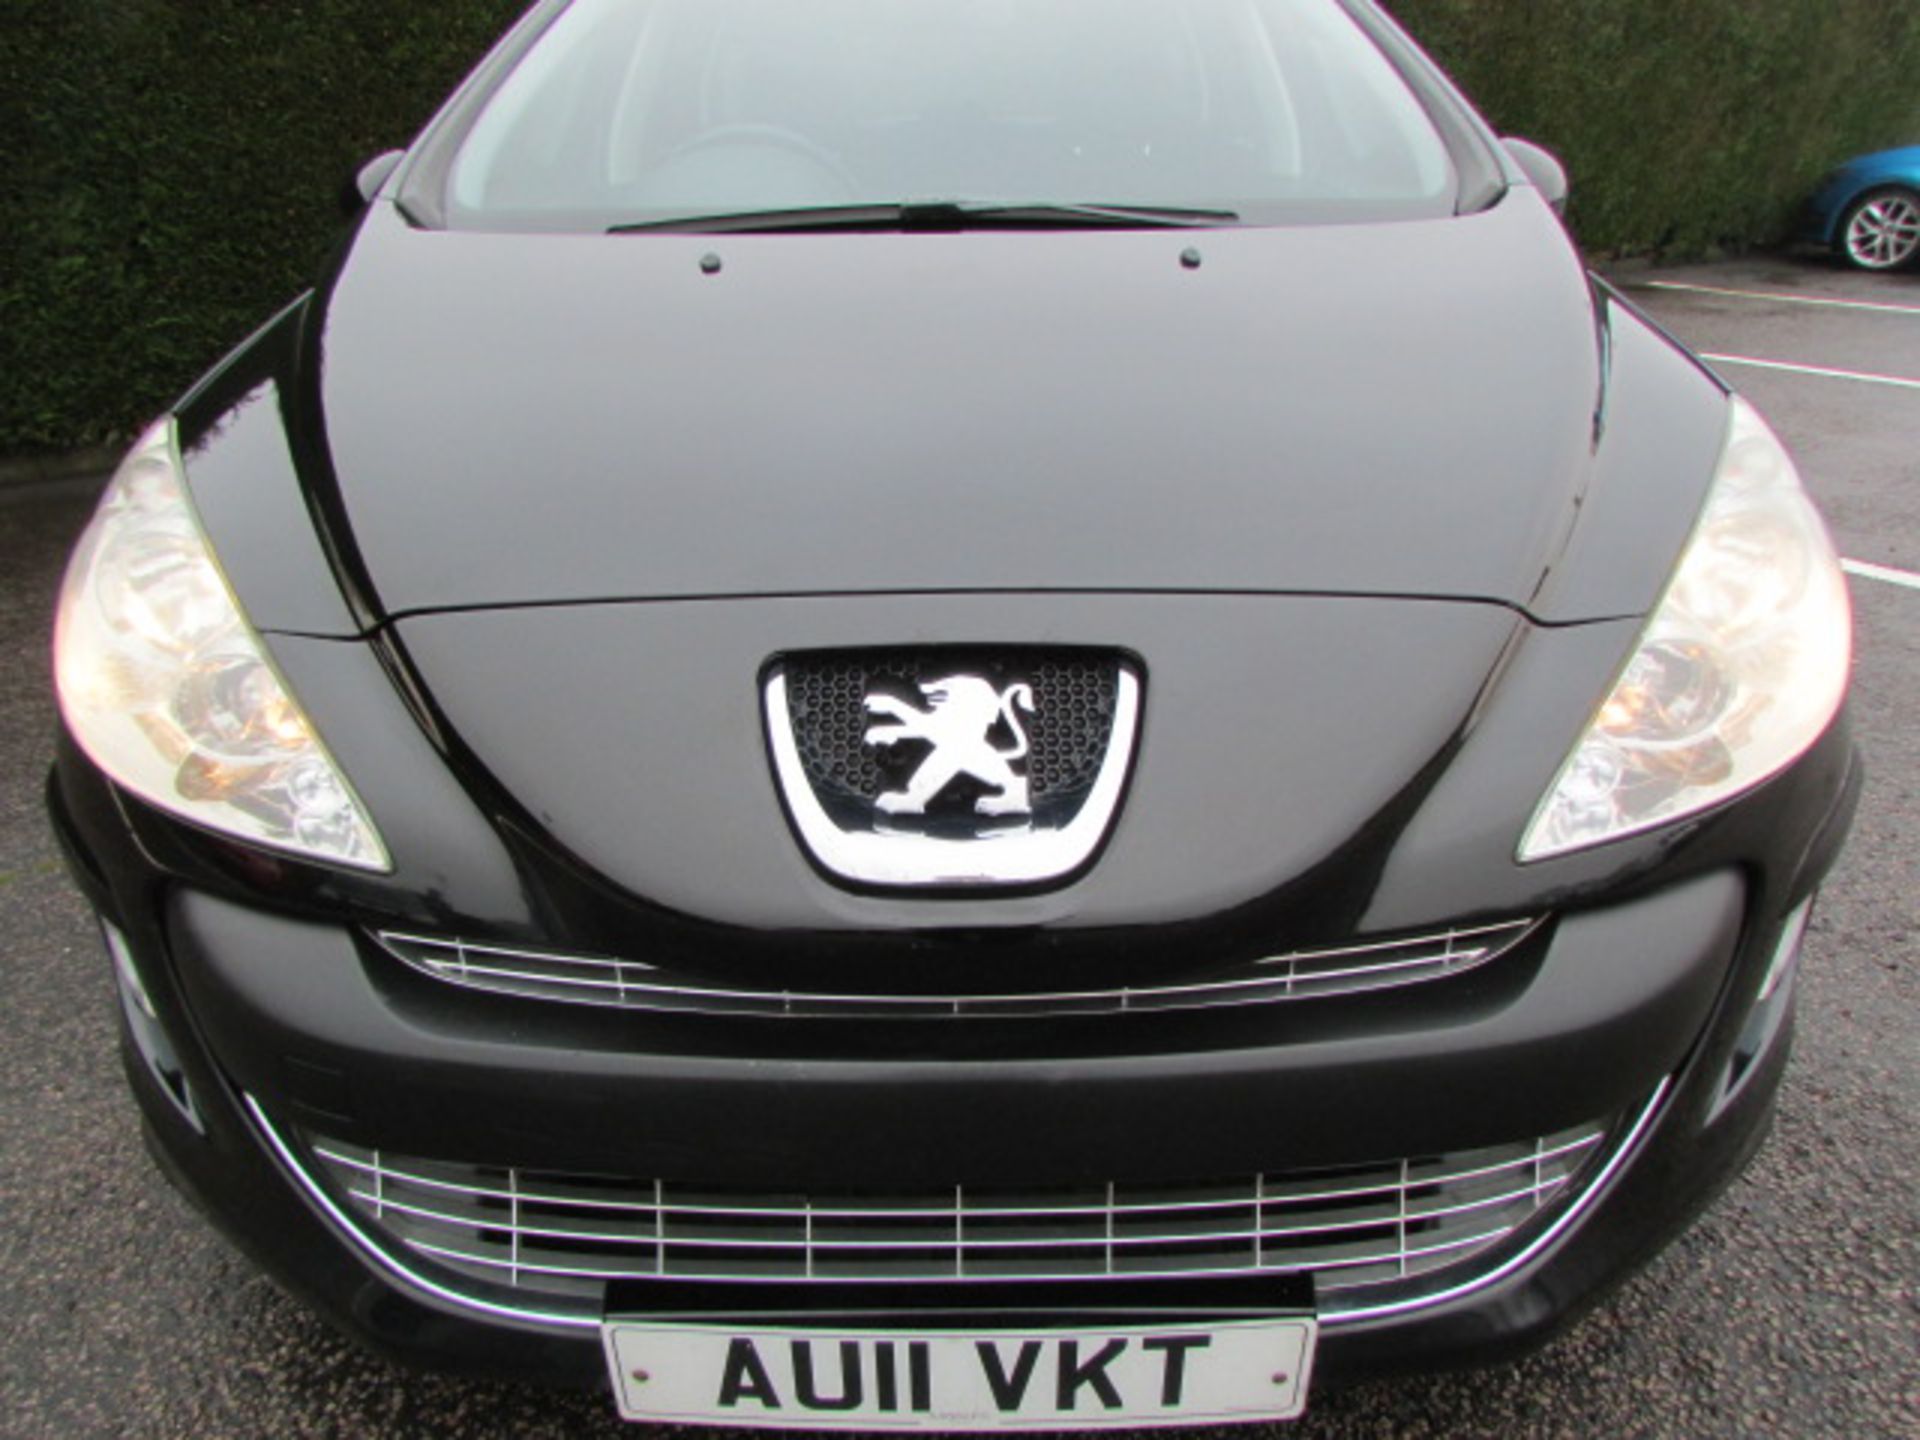 11 11 Peugeot 308 Sport SW HDI 112 - Image 3 of 25